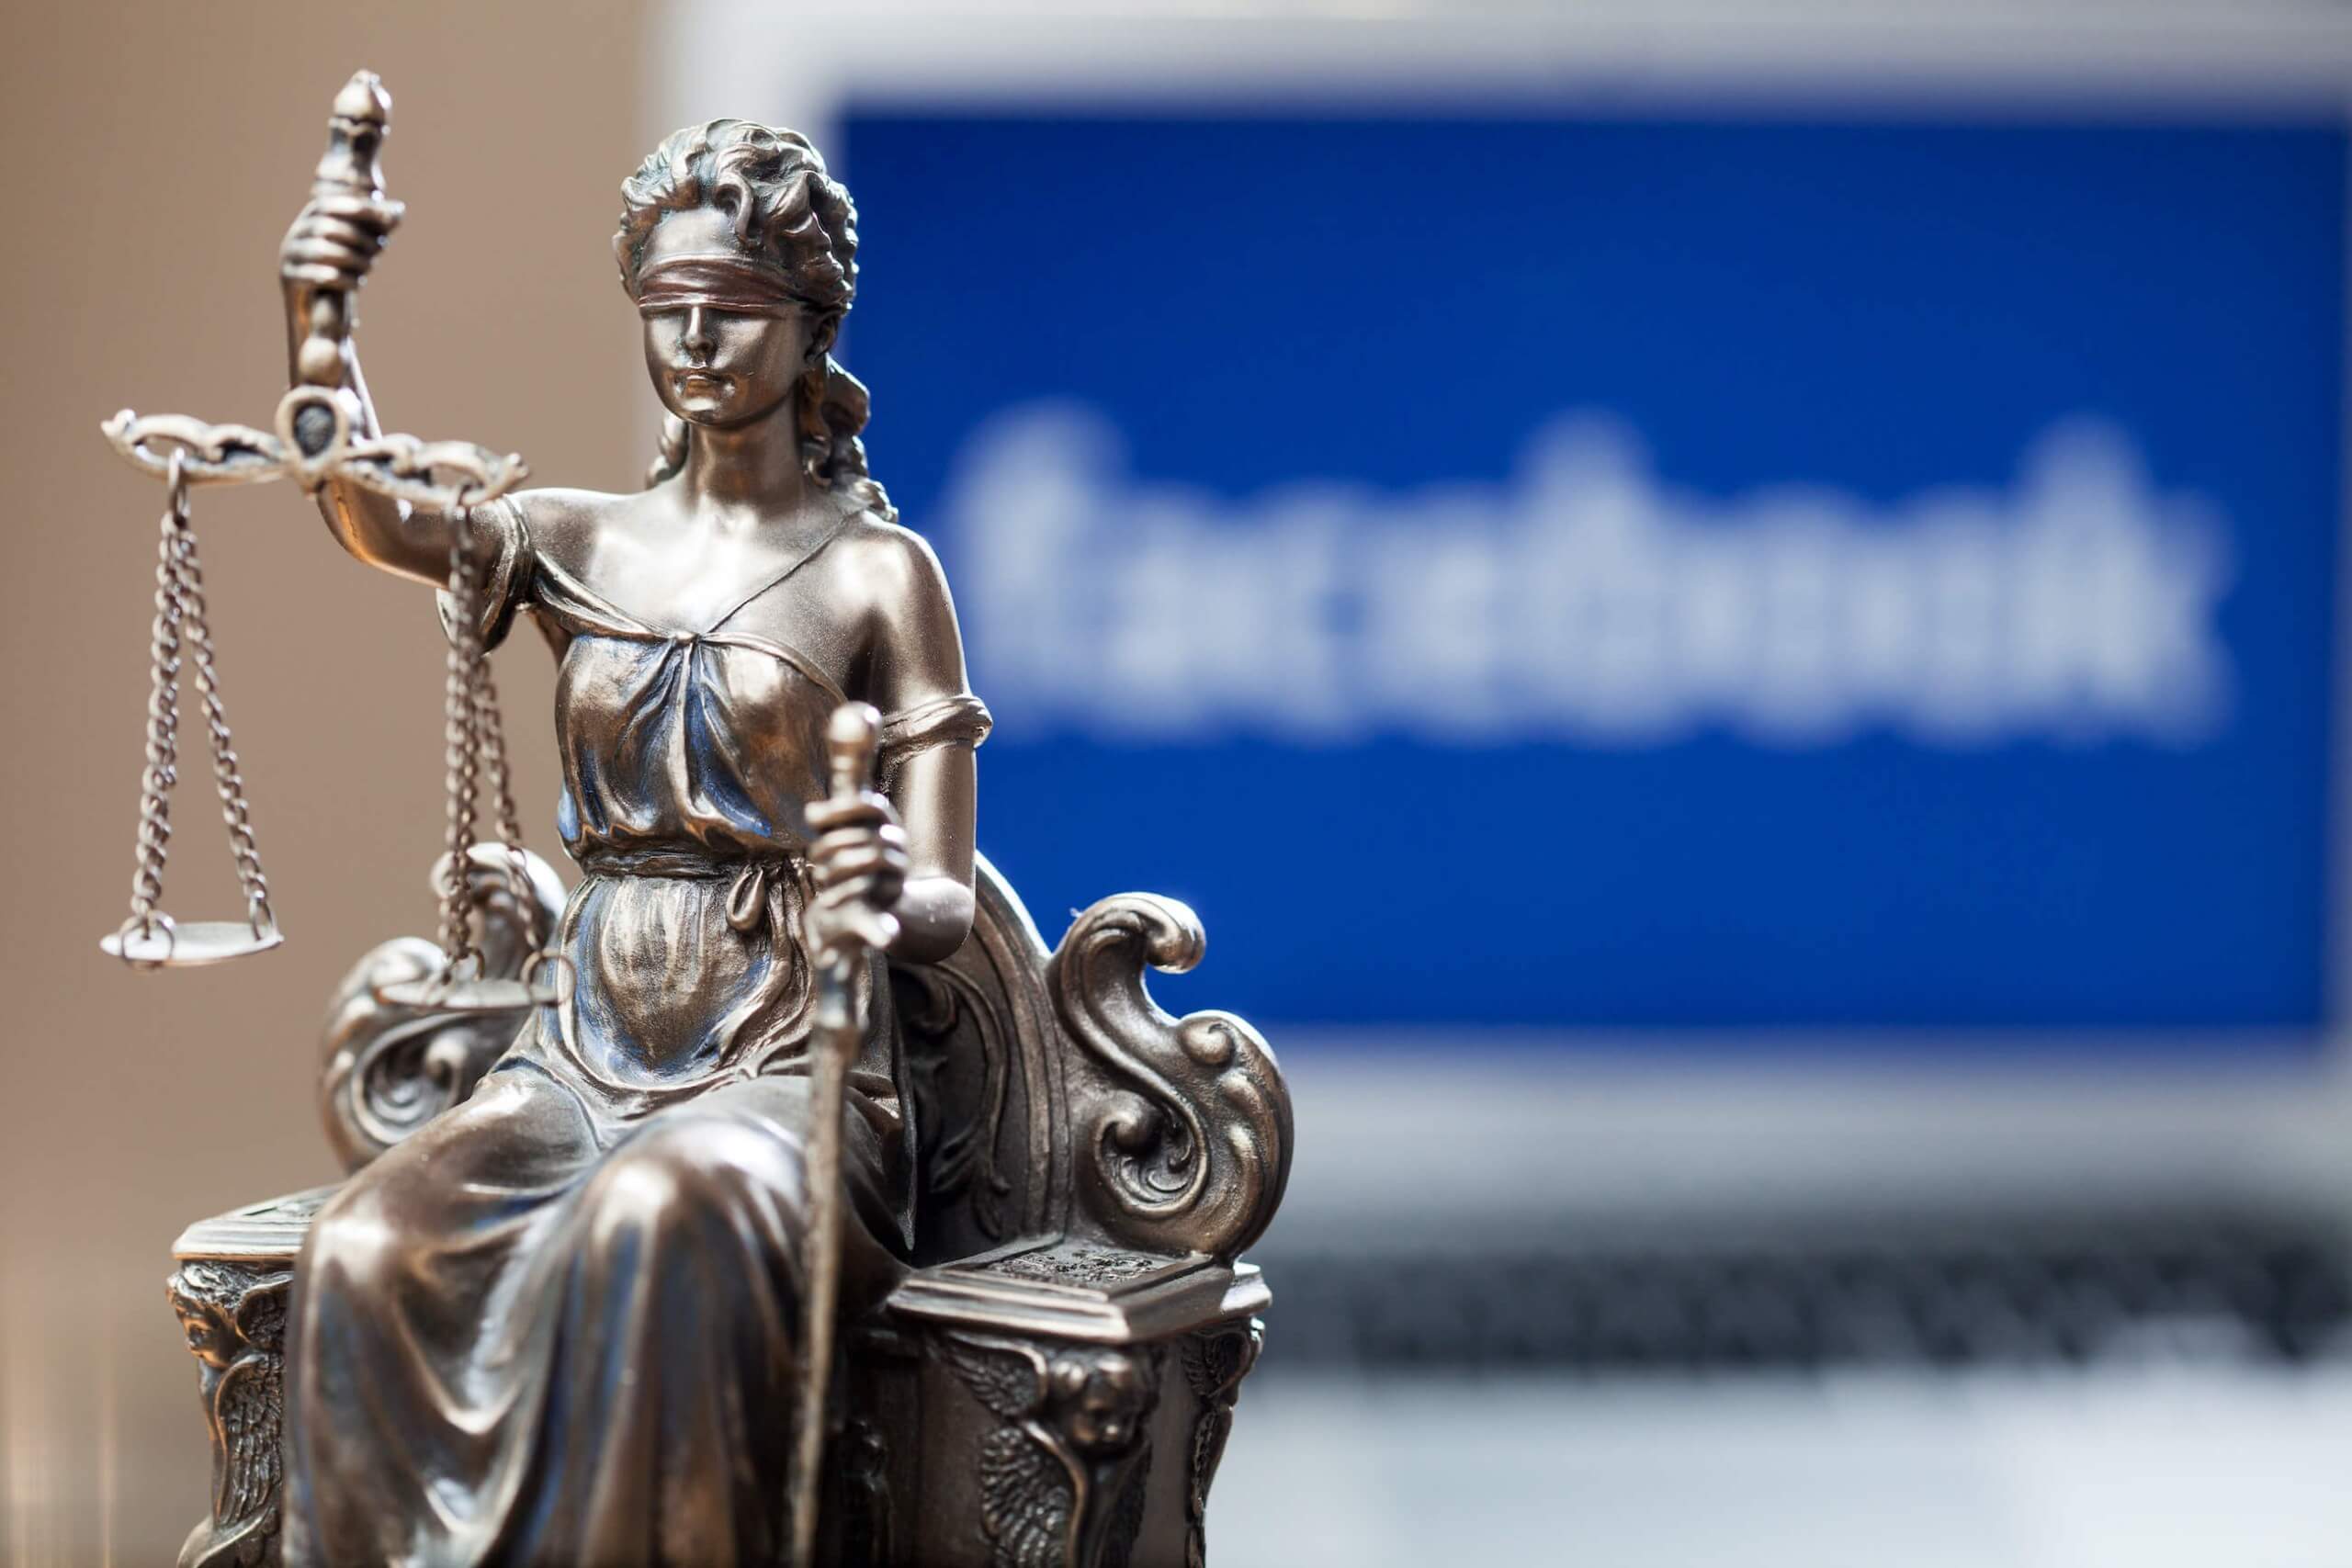 The IRS is suing Facebook for $9 billion in unpaid taxes